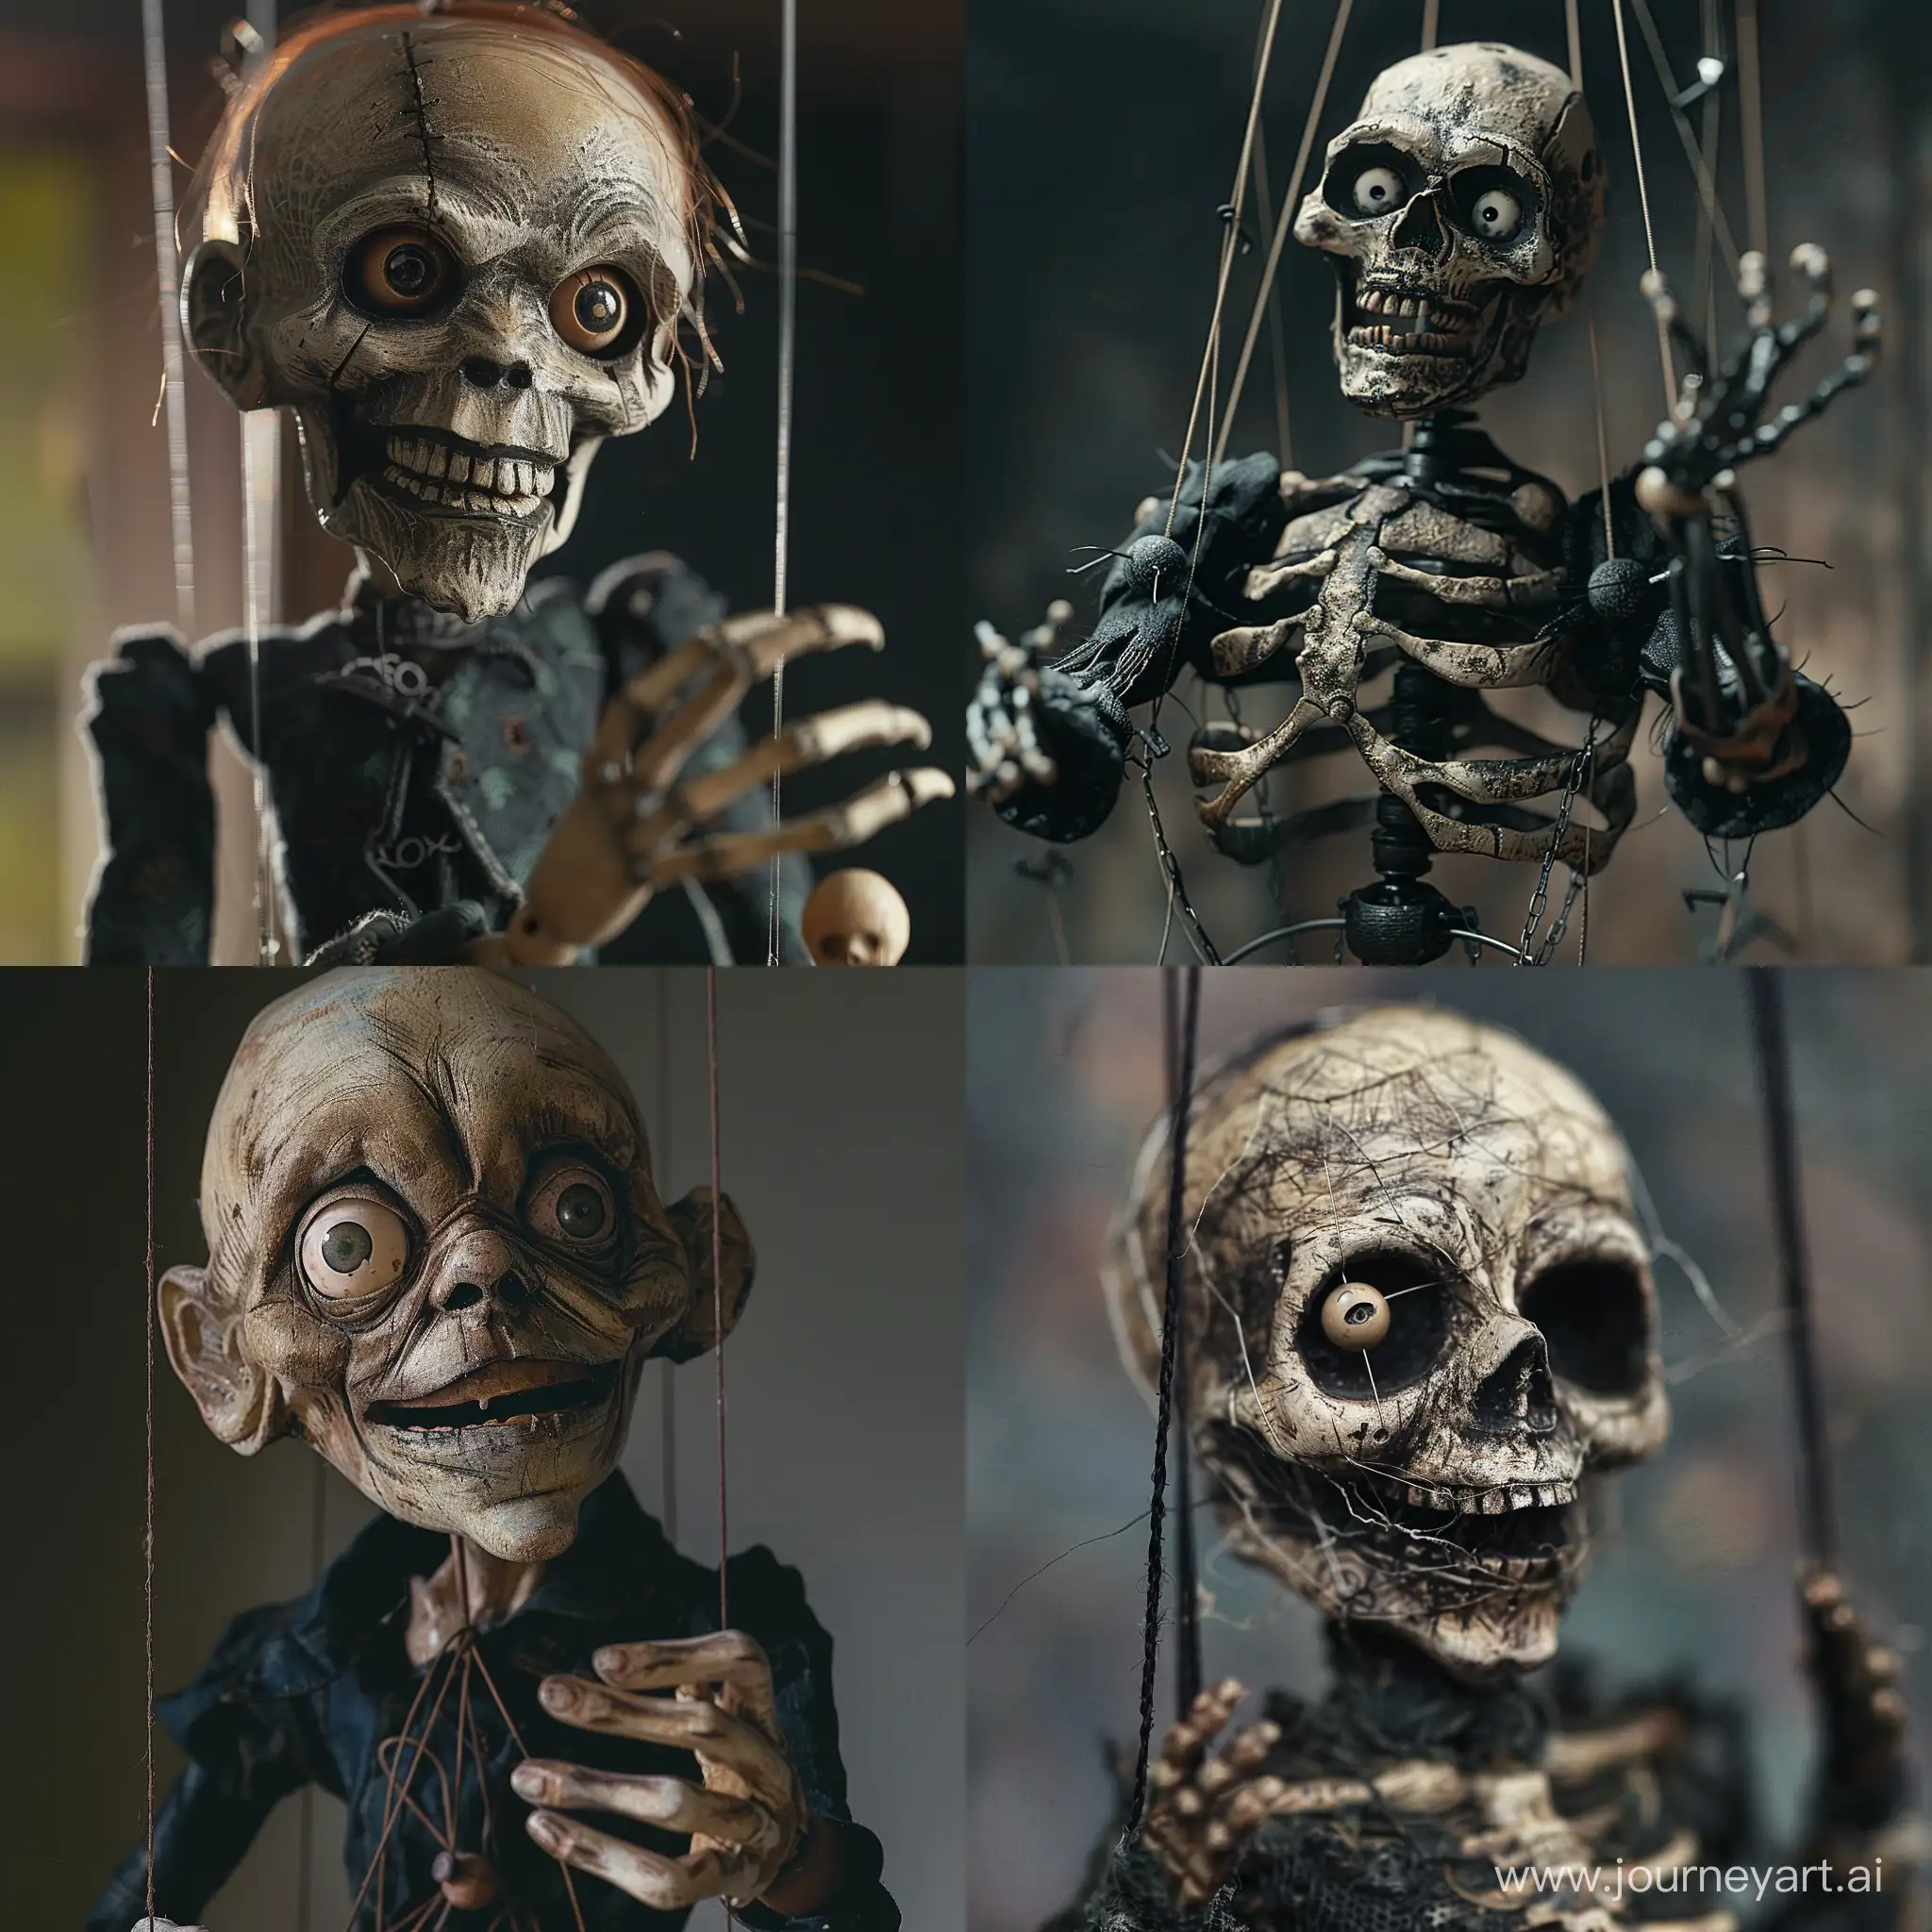 Craft an image that captures the unsettling quality of the macabre marionette. Convey the idea of a puppet with a sinister will of its own.